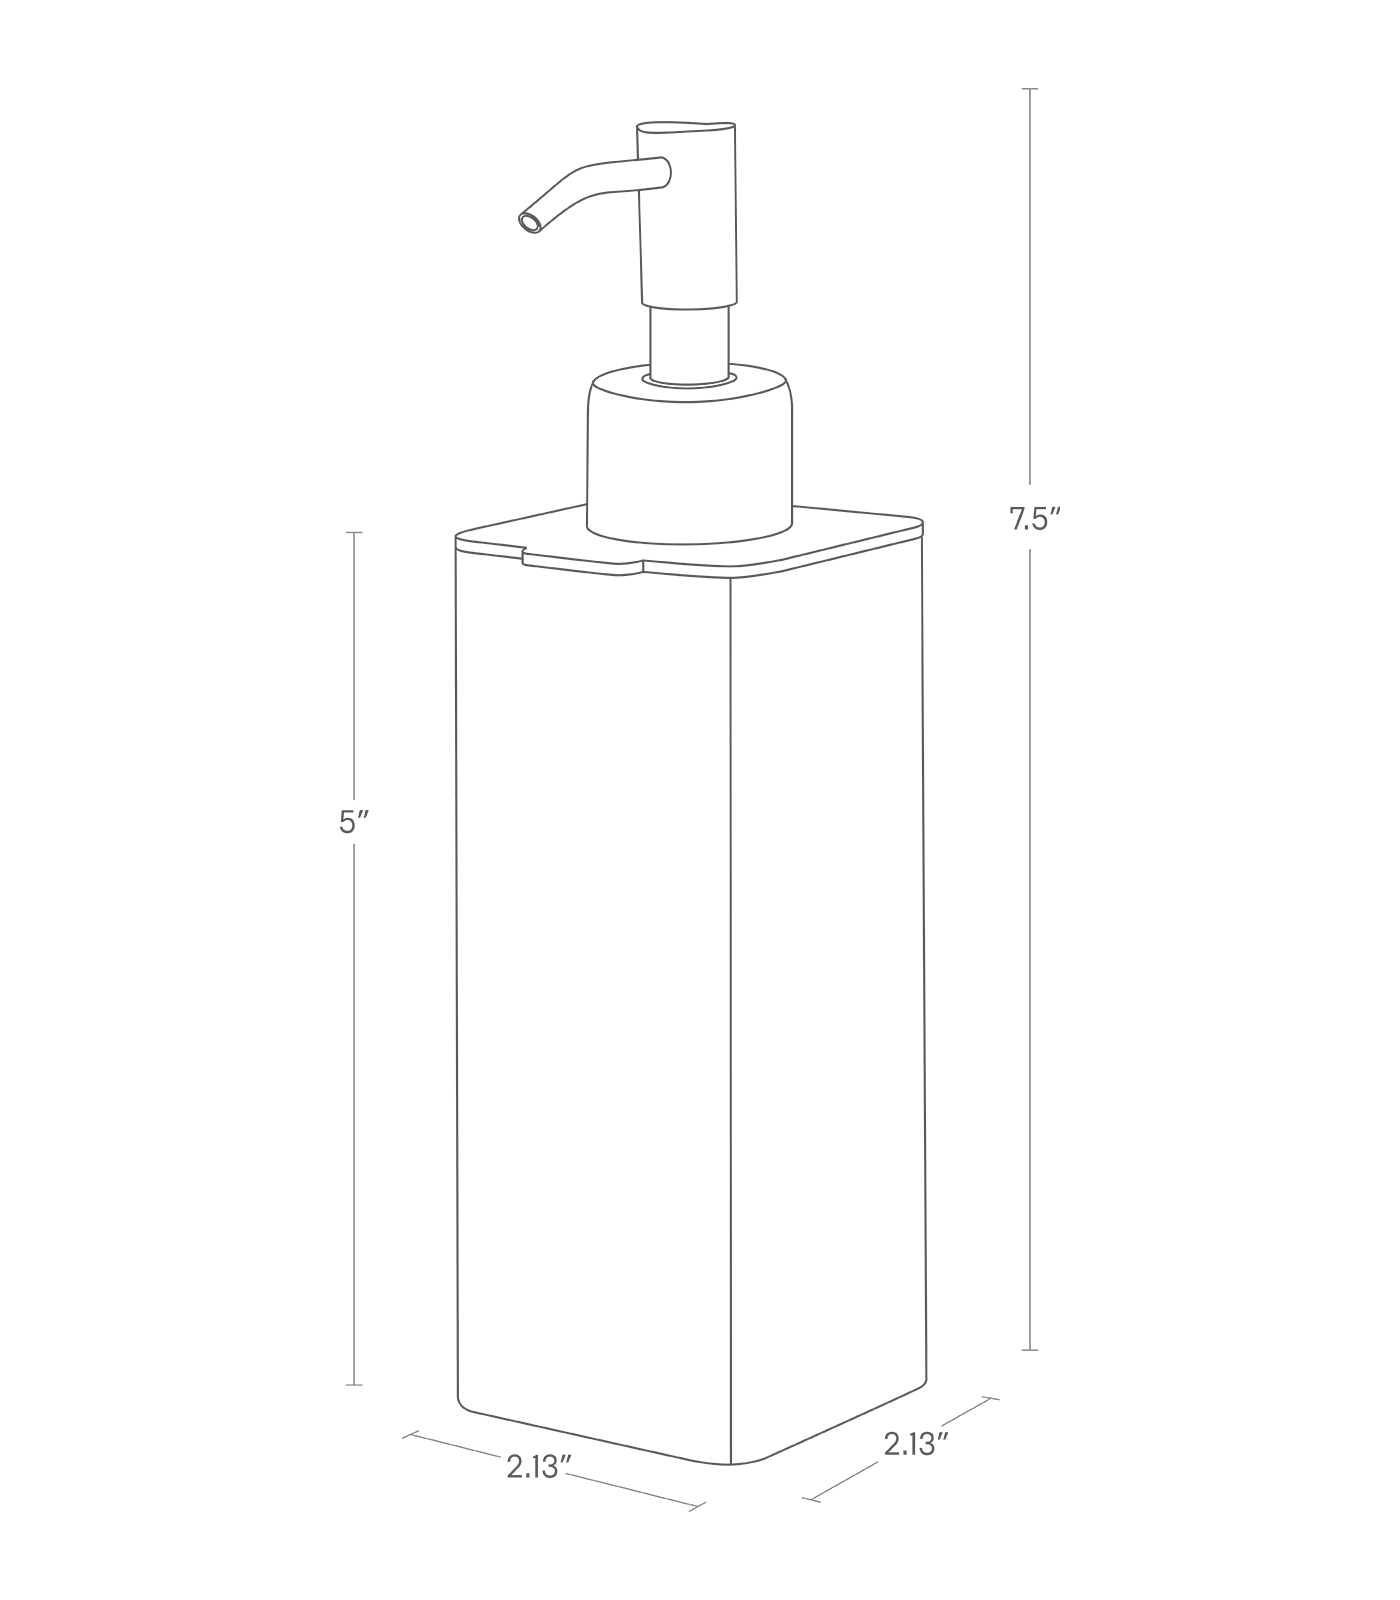 Dimension image for Hand Soap Dispenseron a white background showinglength of 2.13